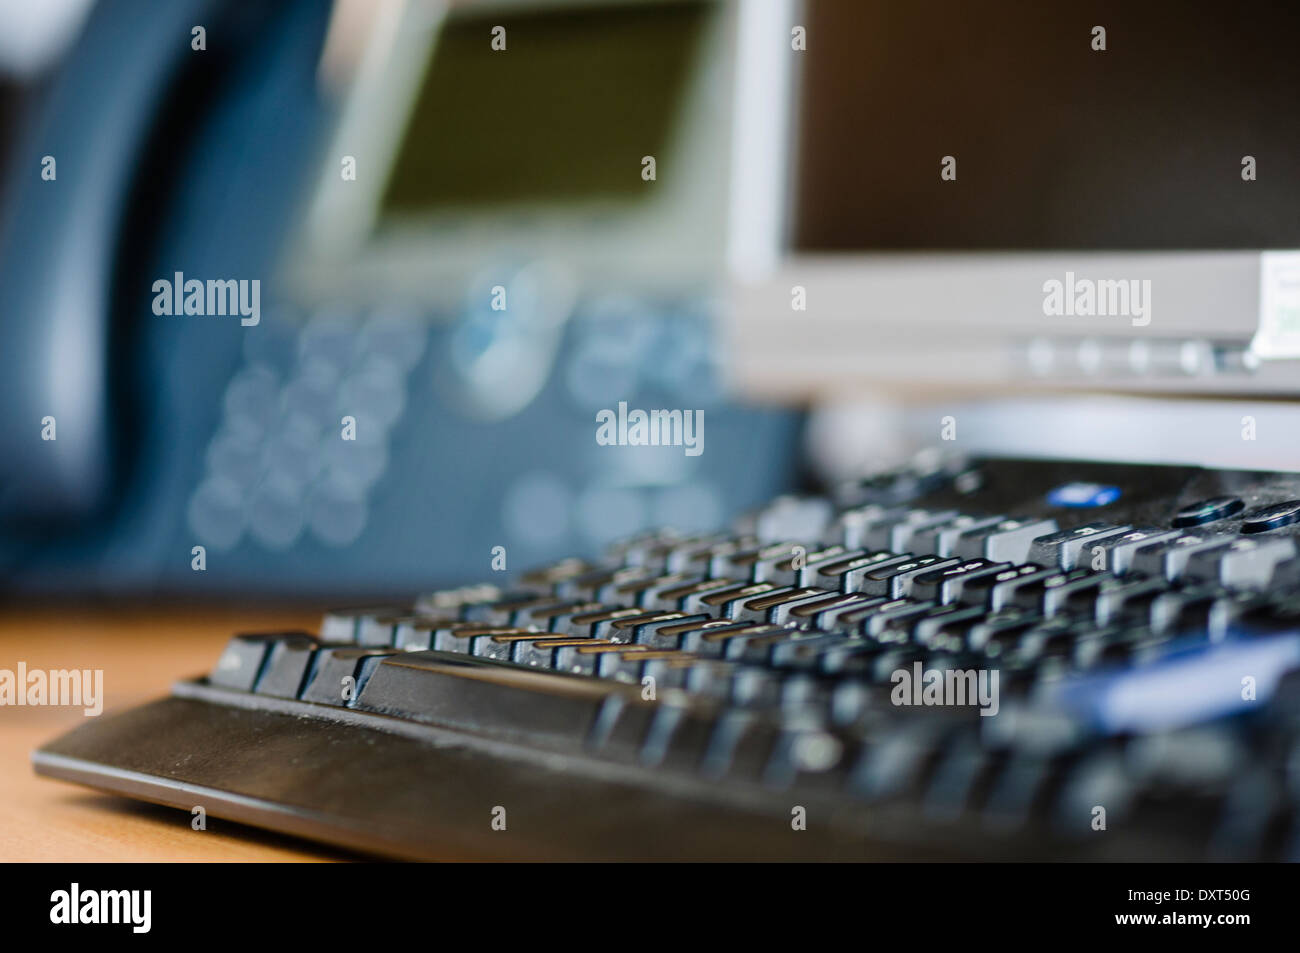 Computer keyboard on an office desk with telephone and monitor Stock Photo